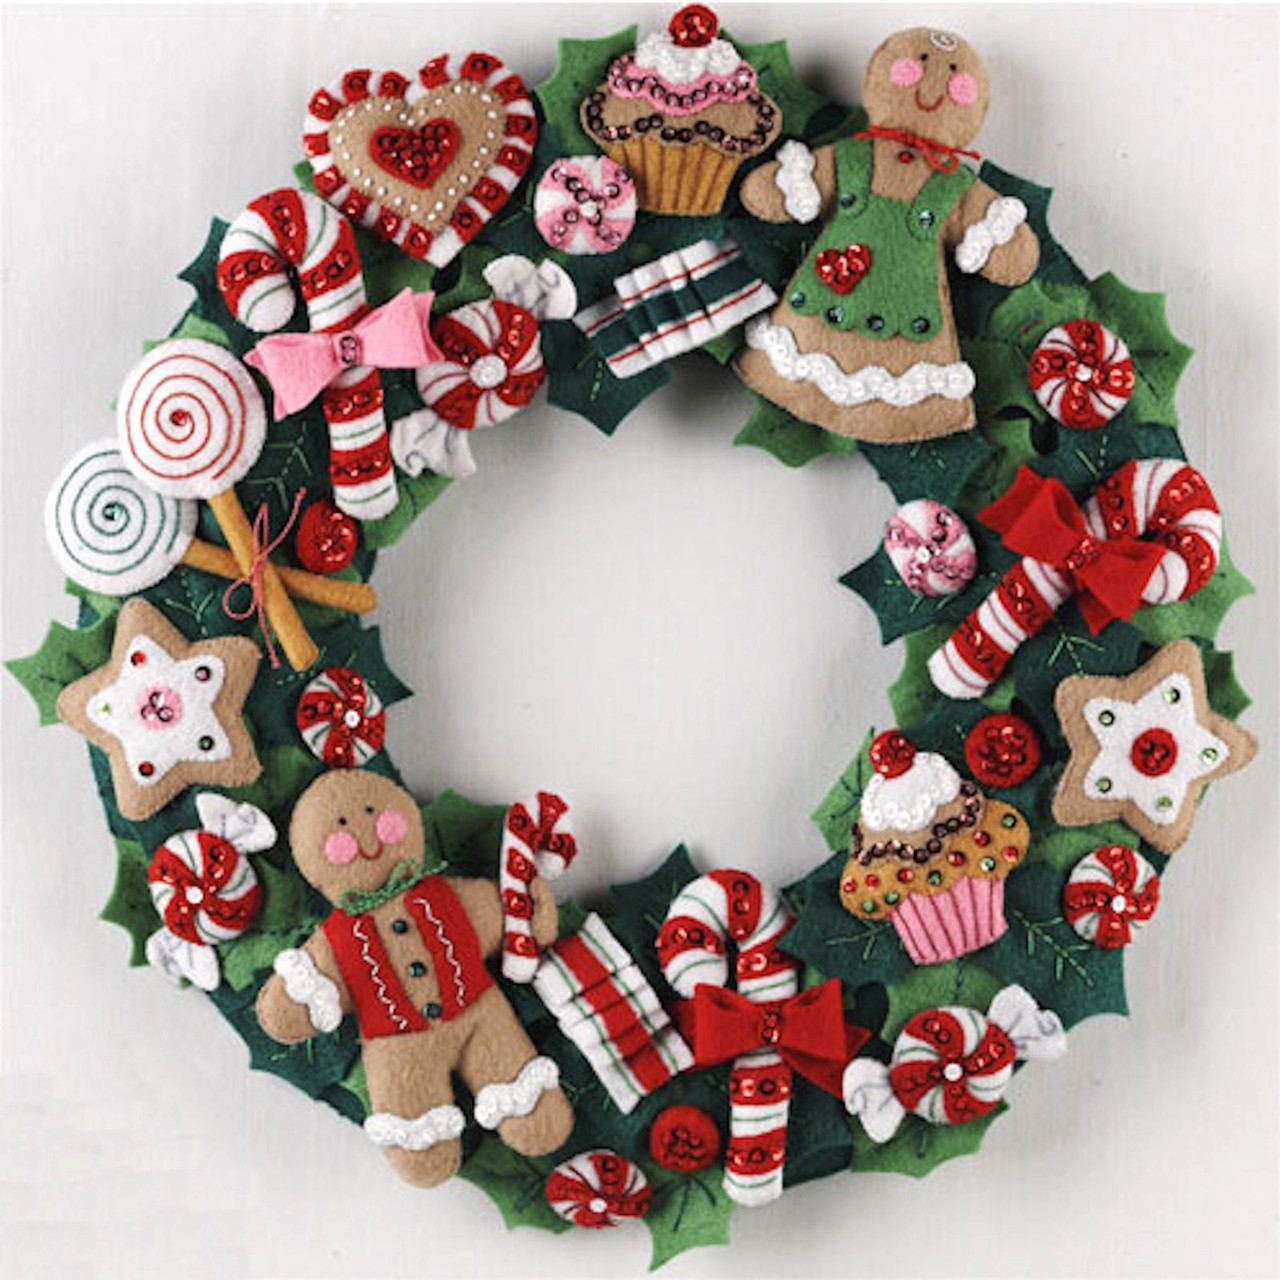 Plaid / Bucilla - Cookies and Candy Wreath